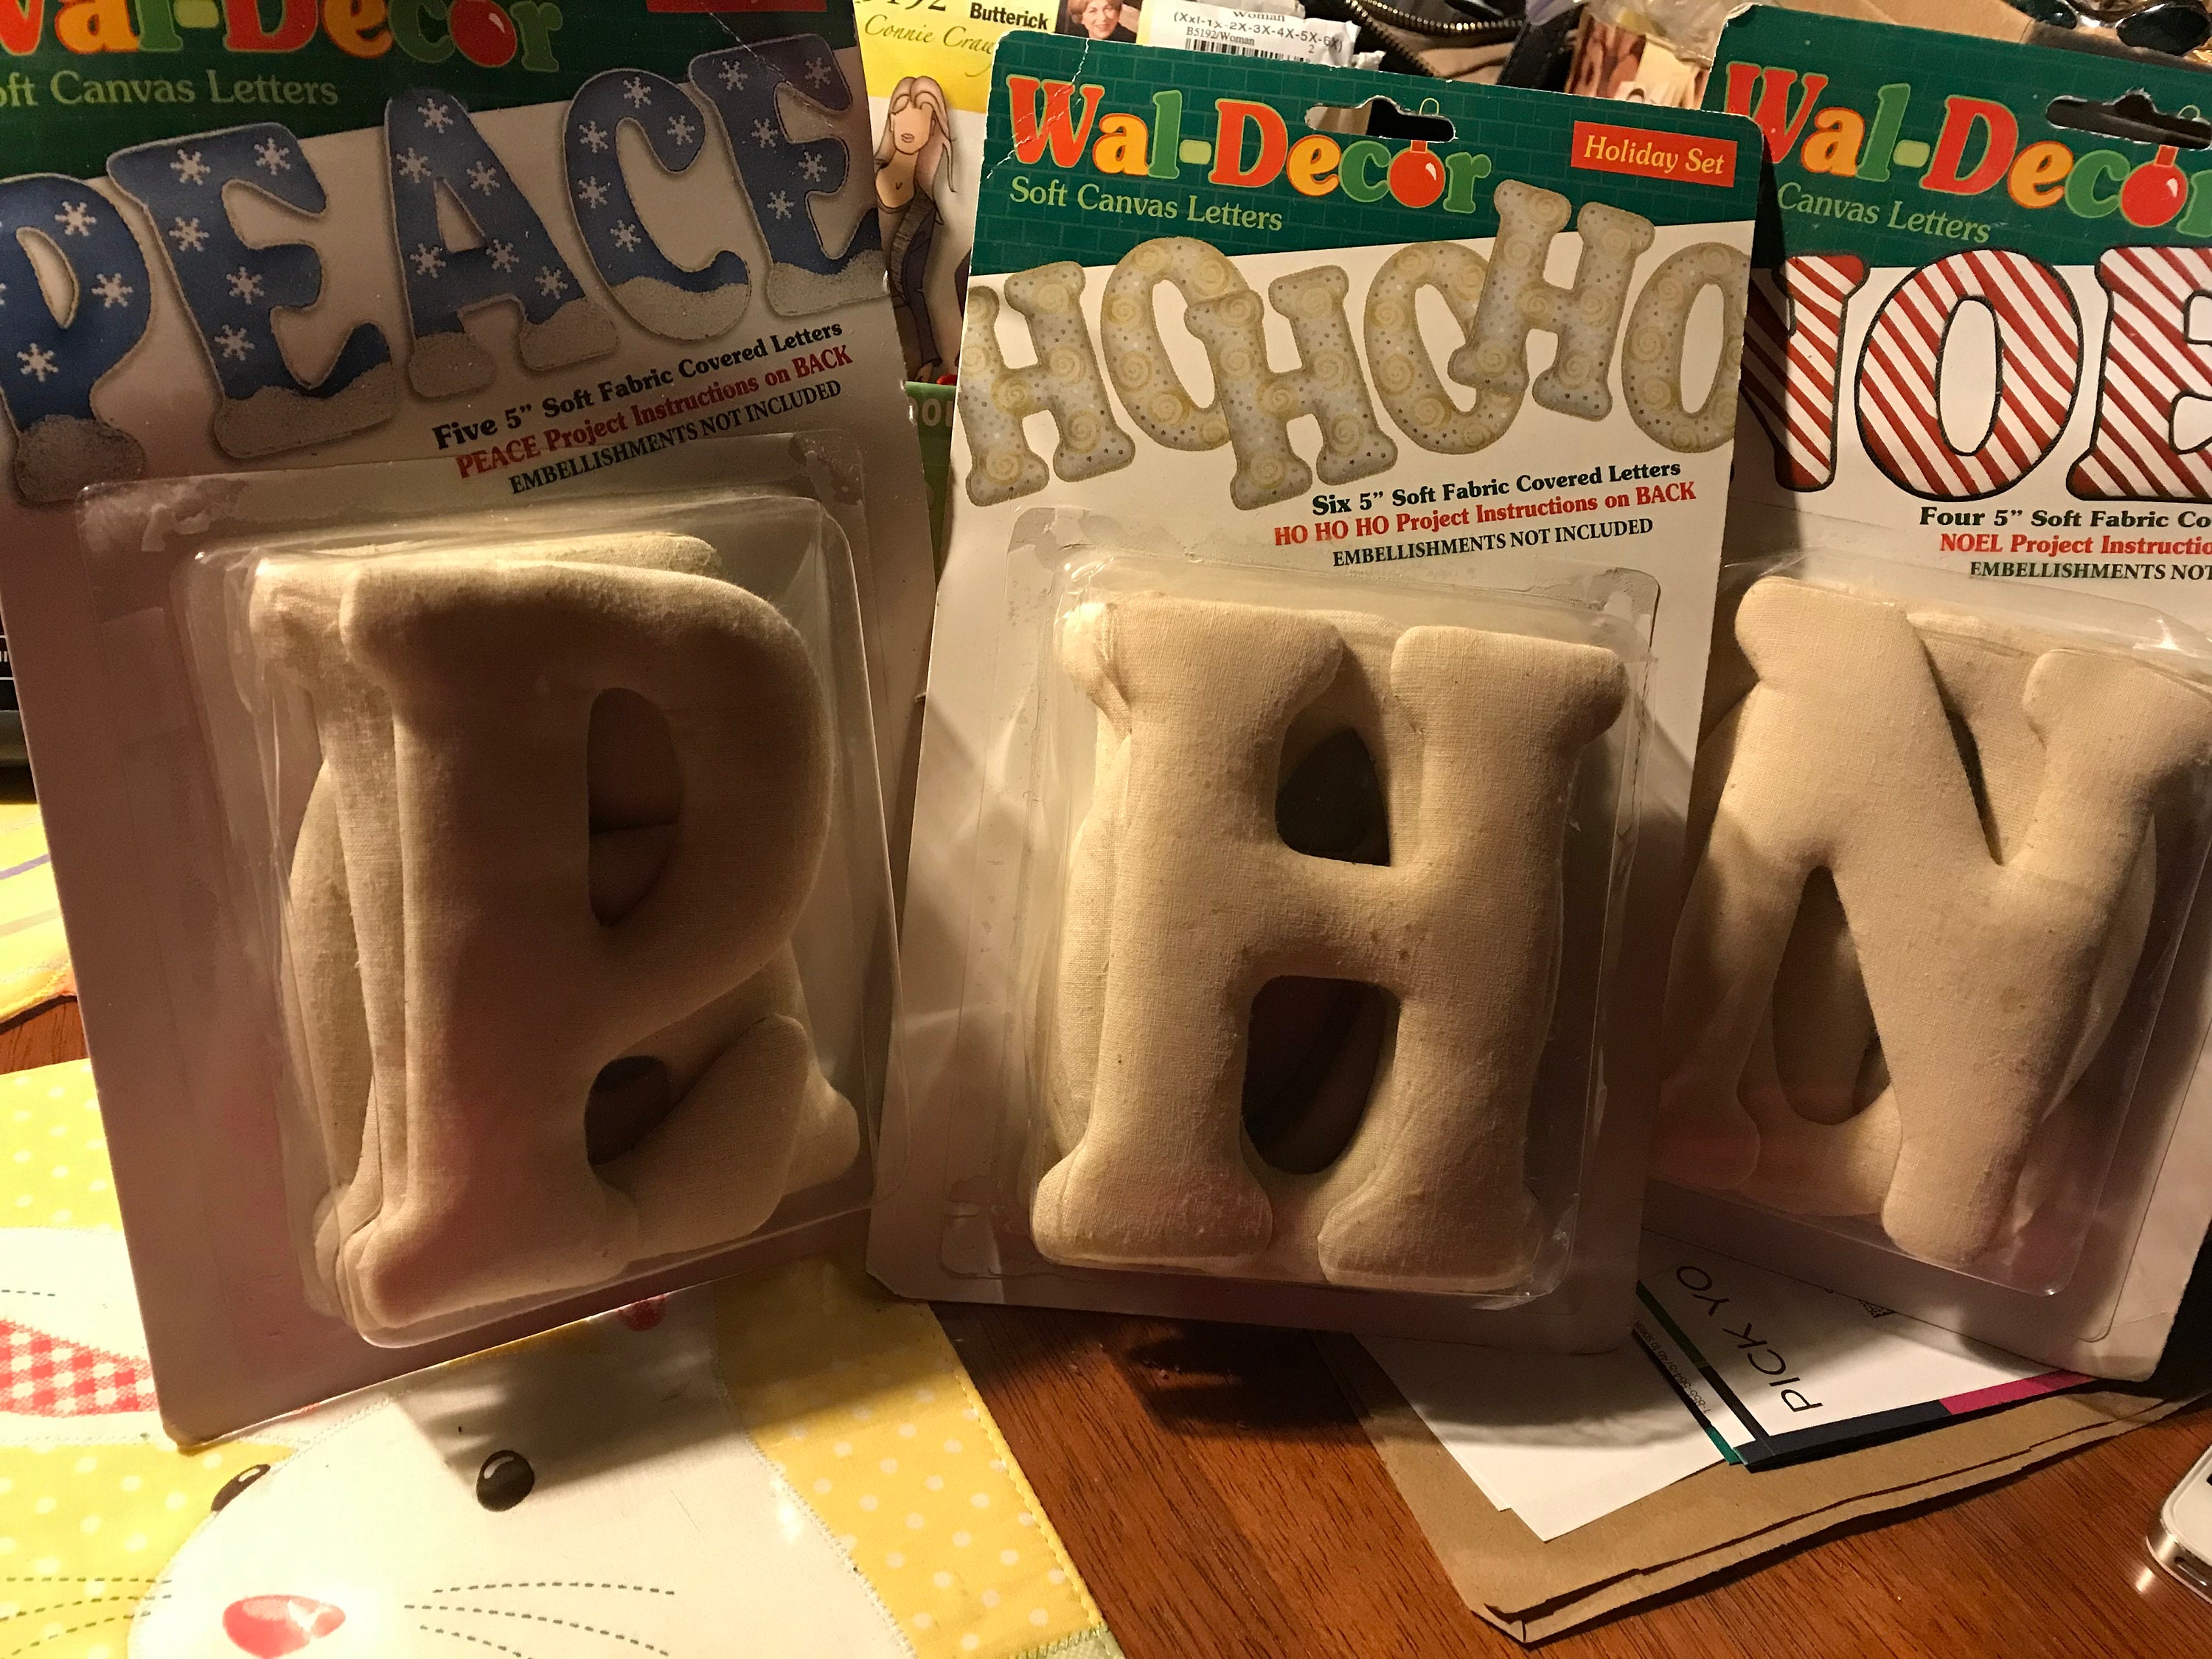 Fabric Covered Letters